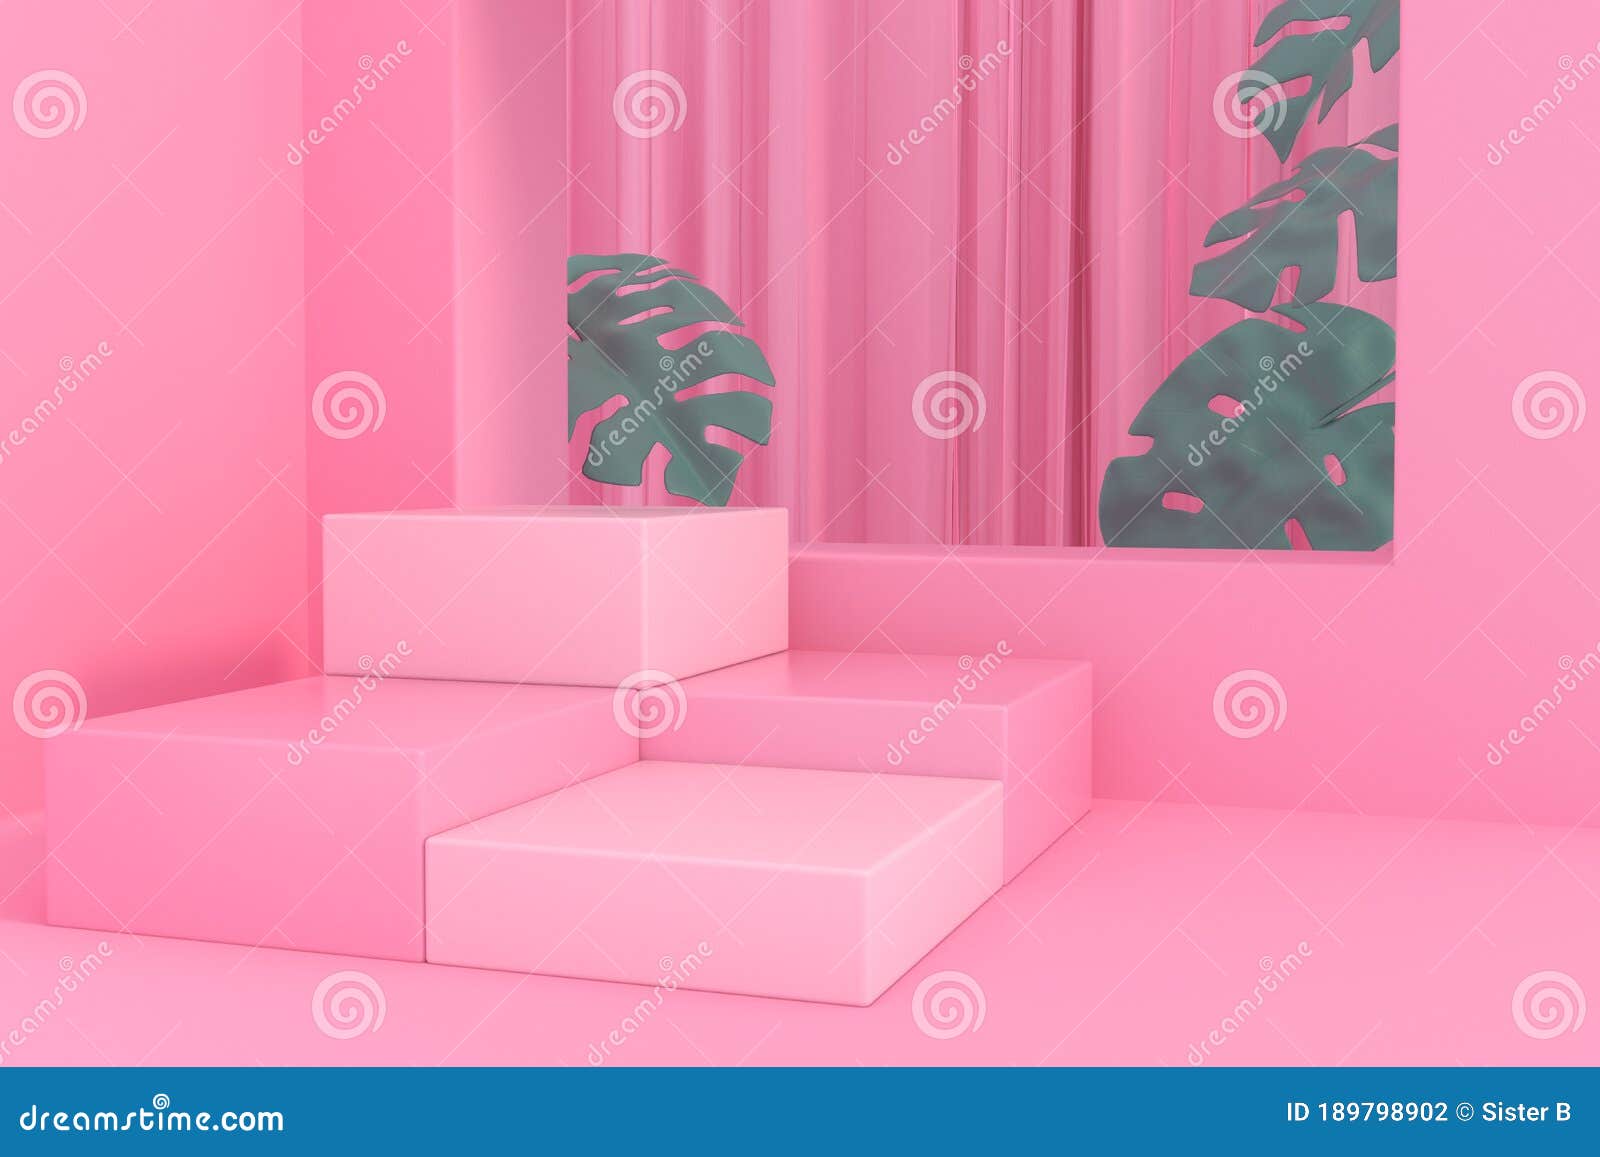 Abstract Pastel Color Background, Minimalist Mockup for Podium Display ...